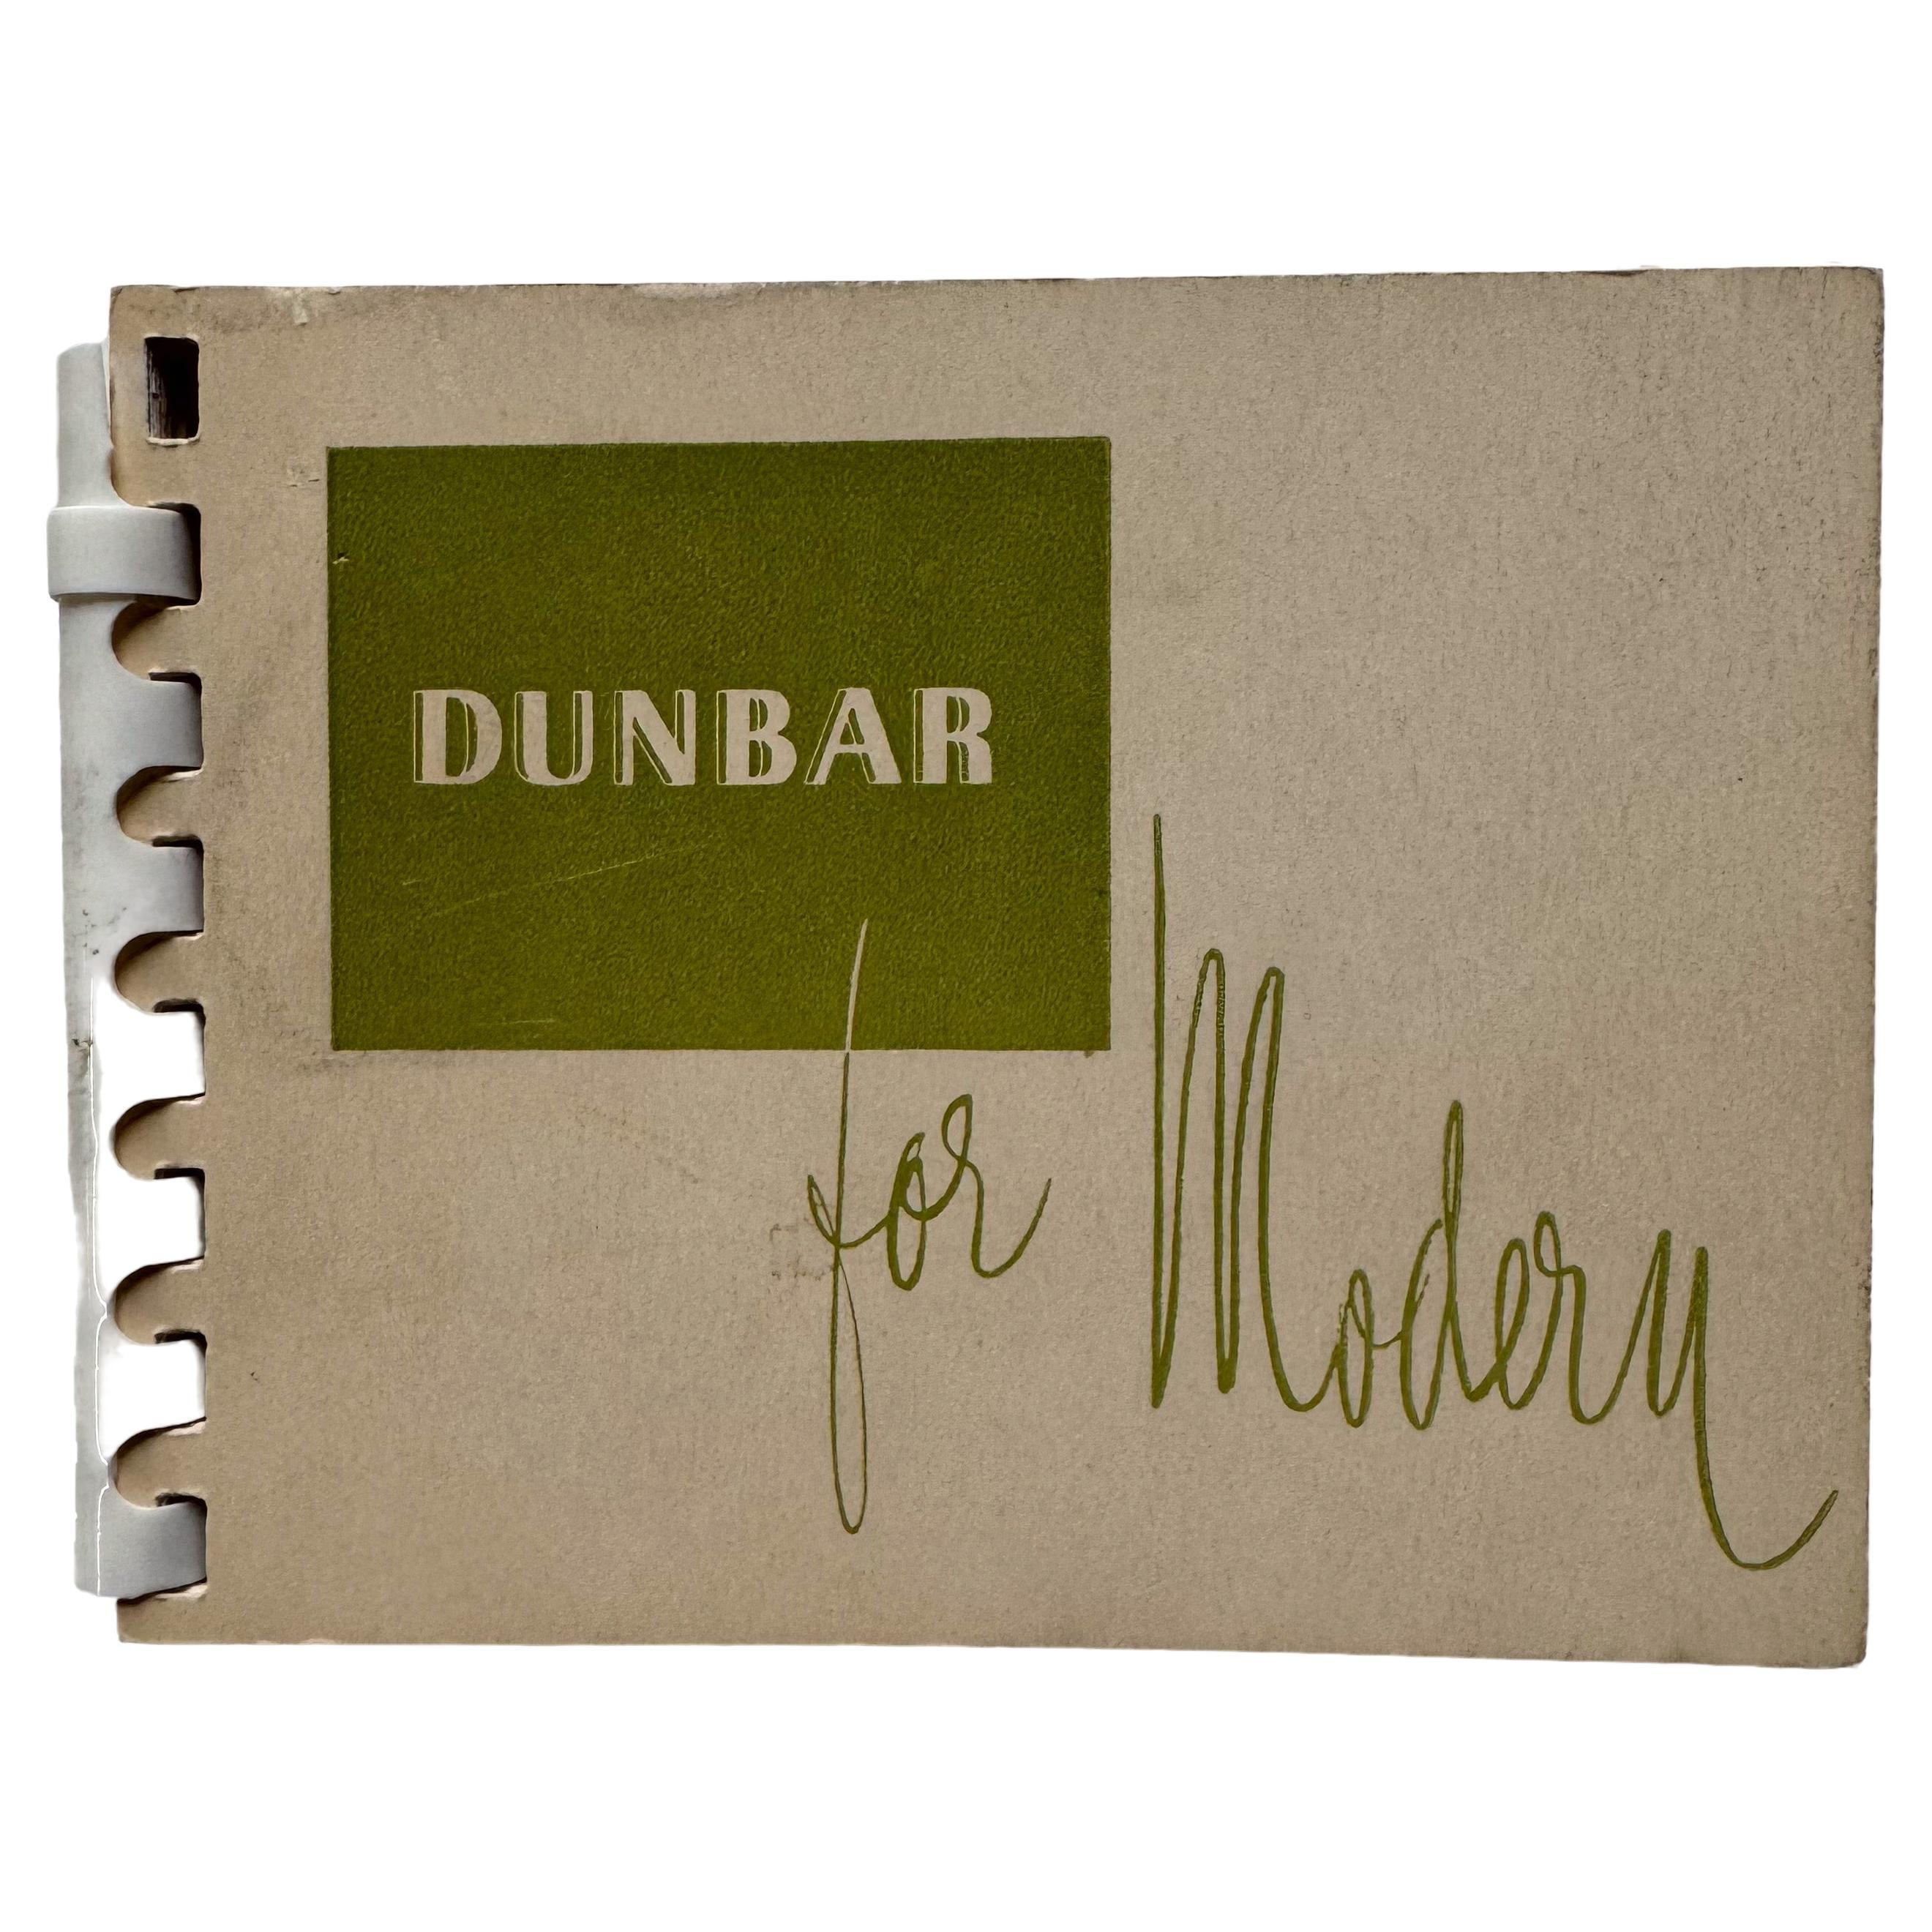 Dunbar For Modern: Market Notes, January 8 to January 19, 1951 For Sale